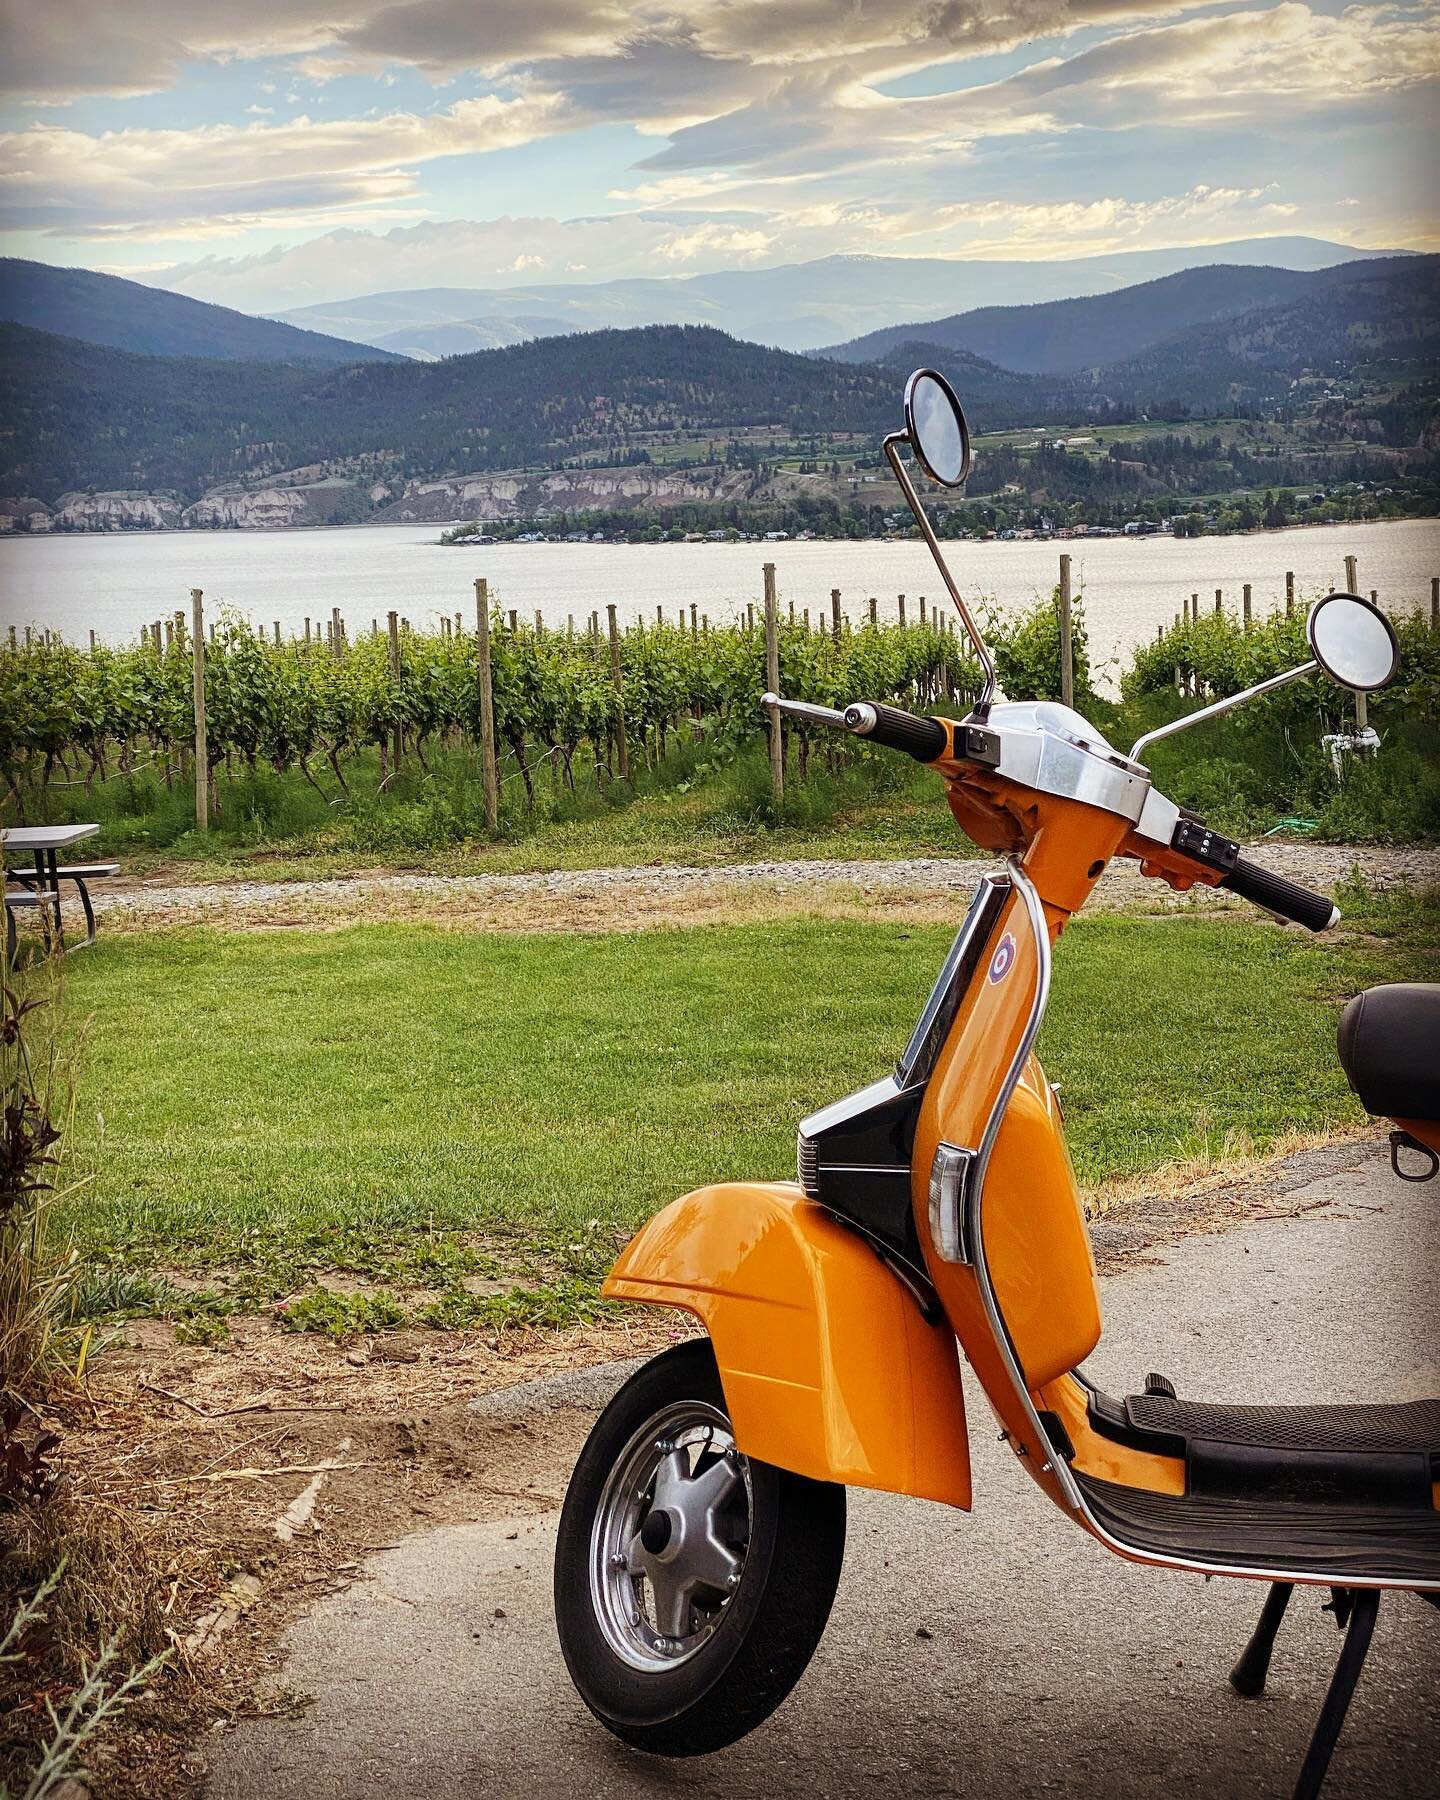 It doesn&rsquo;t take a poet to see the poetry 🤍
&bull;
&bull;
&bull;
#vespa #vineyardviews #vineyards #naramatabench #naramatabenchwineries #naramatalove #instagood #photooftheday #beautiful #art #photography #happy #picoftheday #cute #summer #food